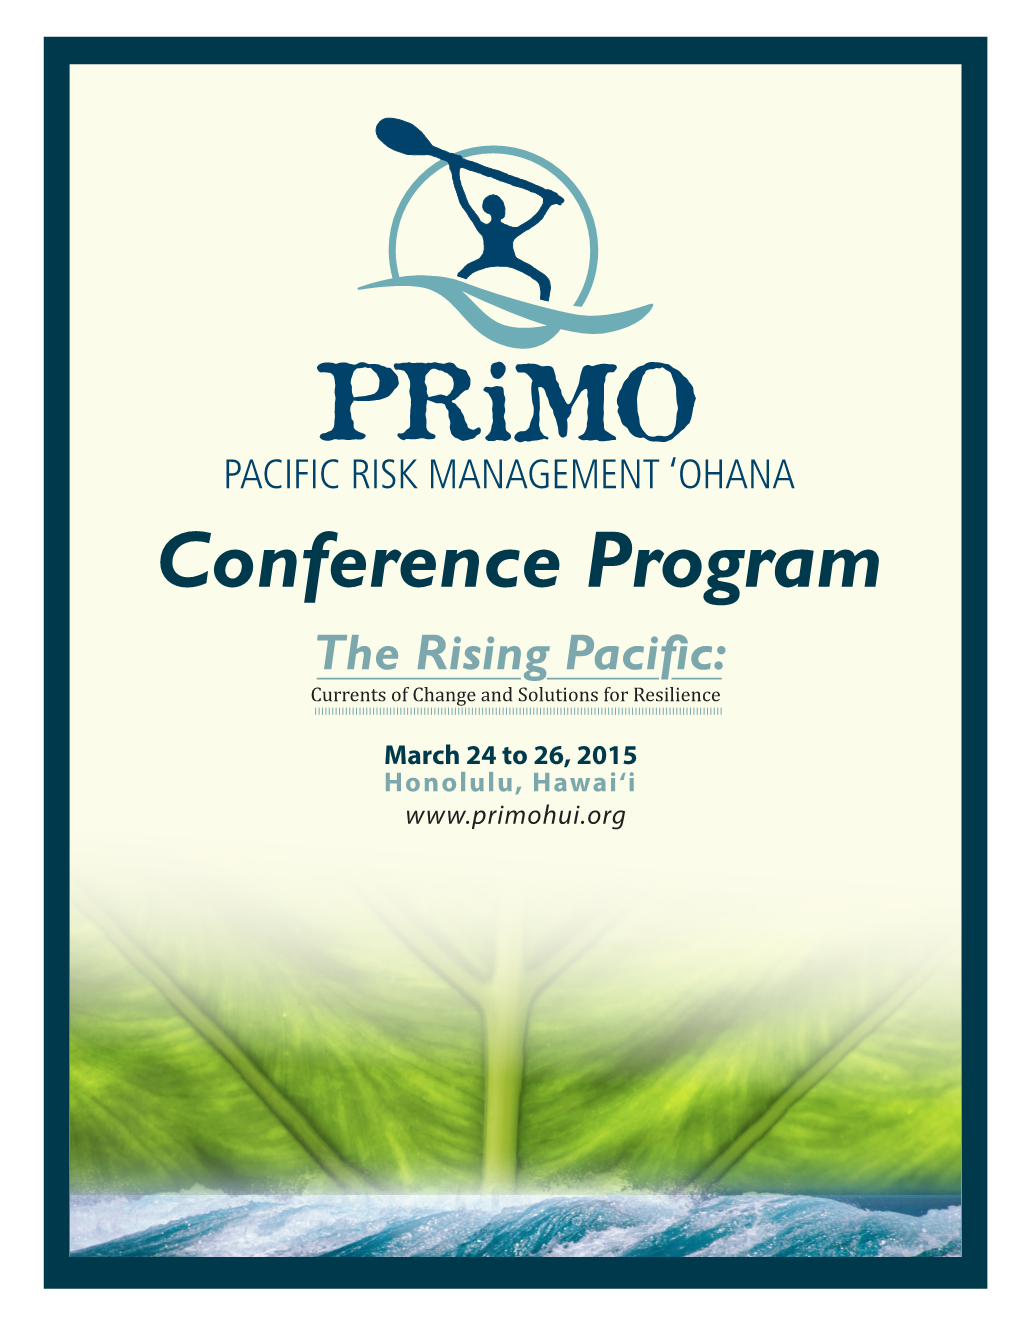 Conference Program the Rising Pacific: Currents of Change and Solutions for Resilience